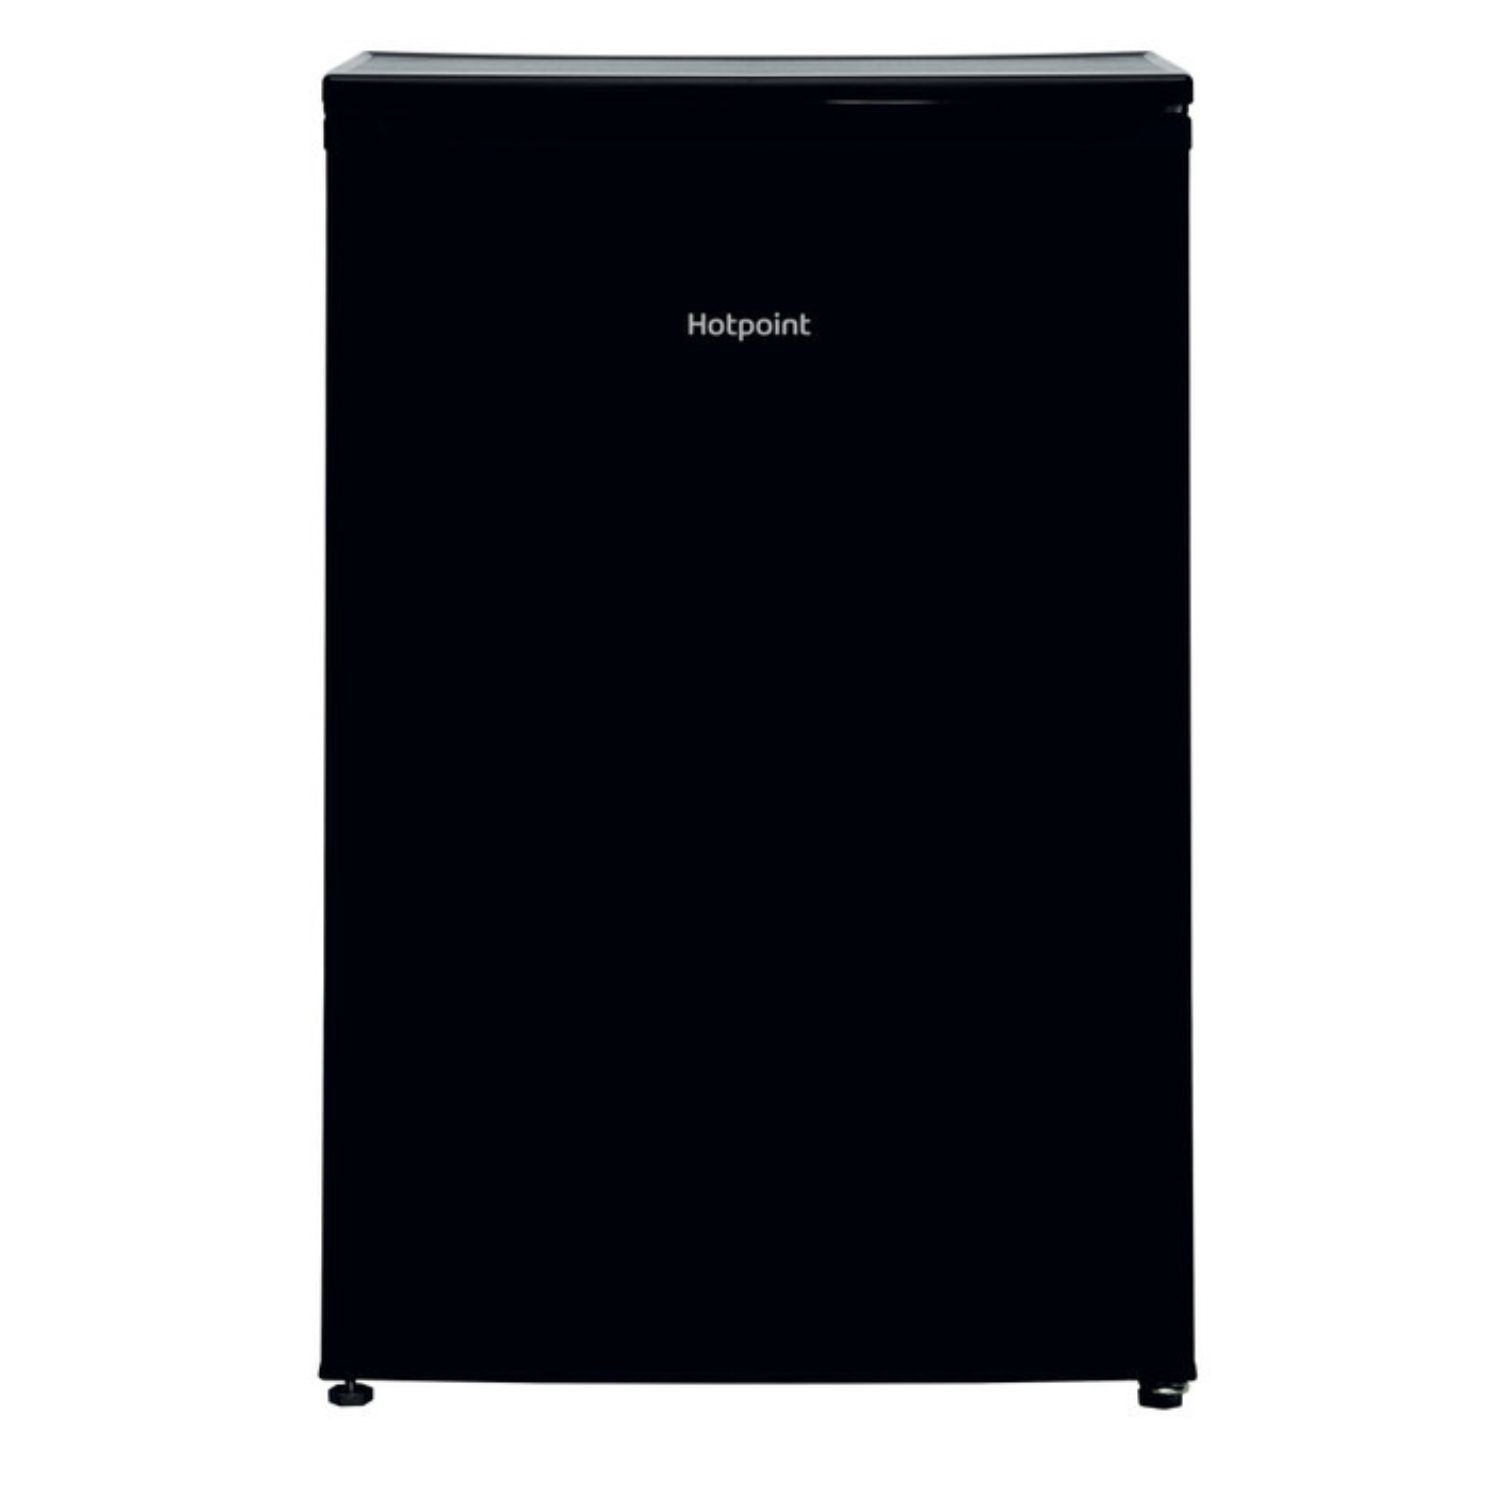 Photos - Other for Computer Hotpoint-Ariston HOTPOINT 102 Litre Freestanding Under Counter Freezer - Black 869991676370 